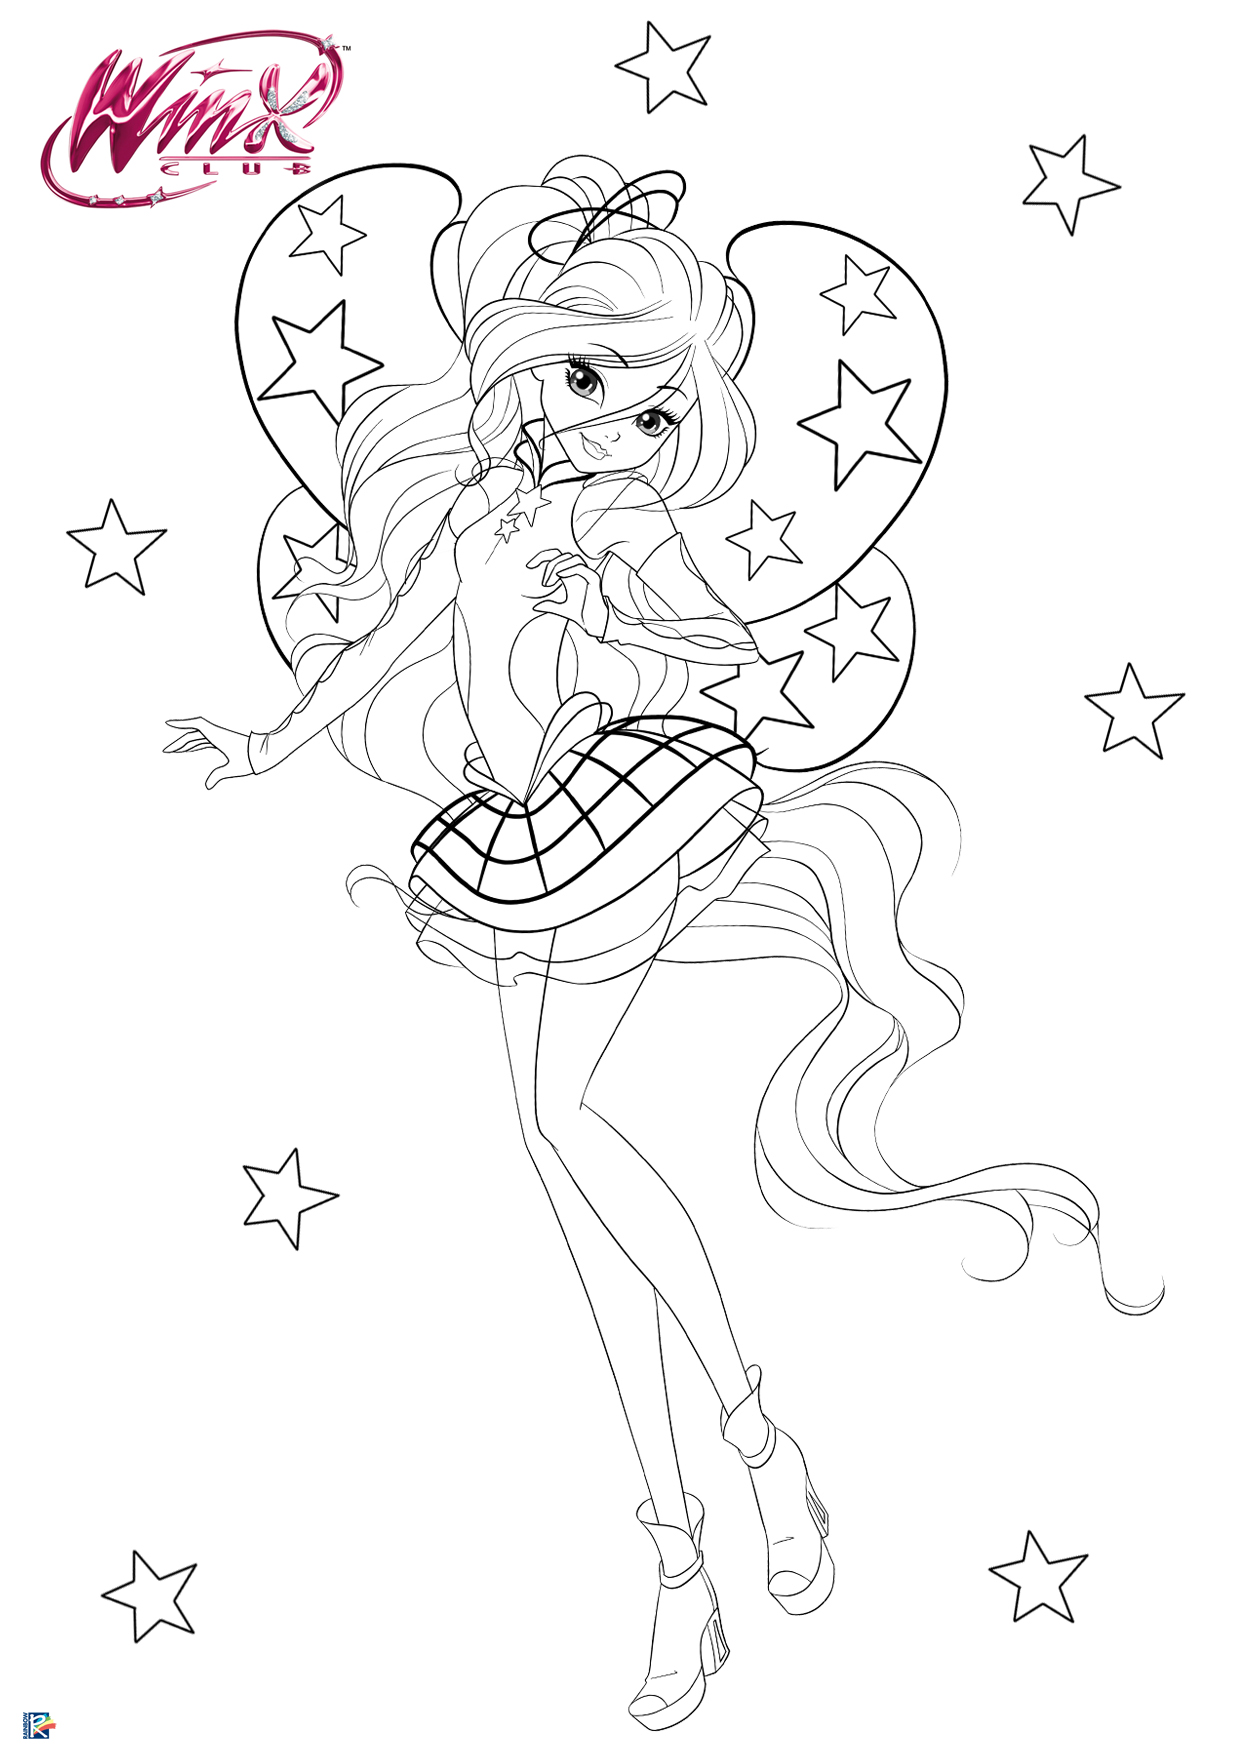 20 Winx Club Layla Coloring Pages - Printable Coloring Pages